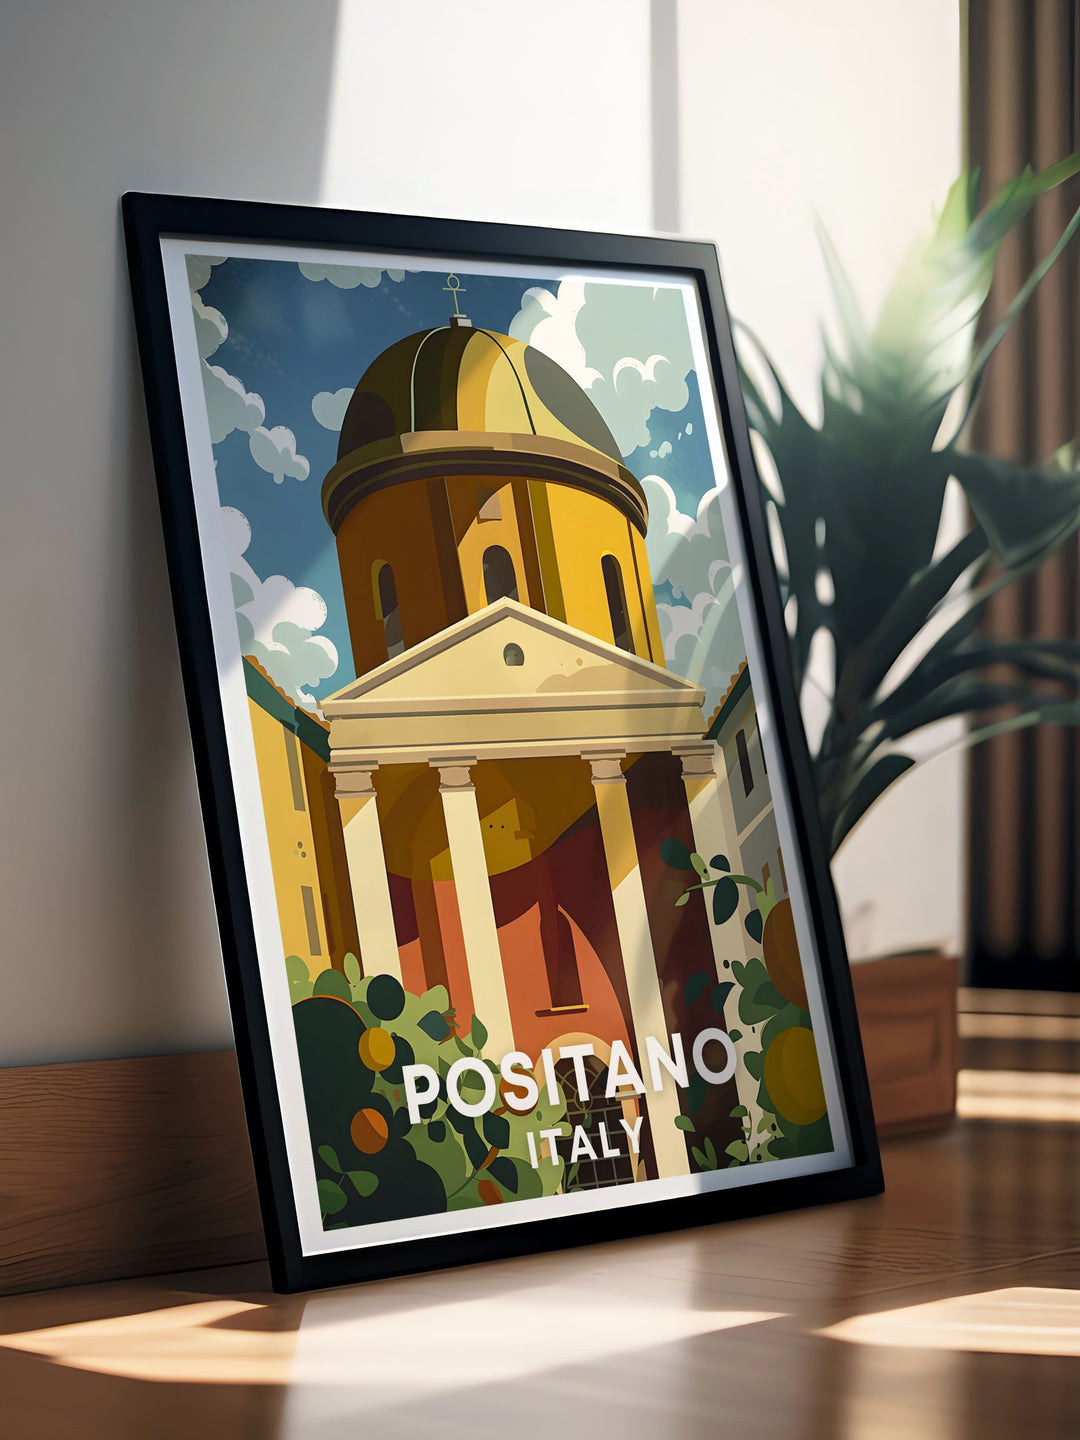 Wall art of The Chiesa di Santa Maria Assunta in Positano perfect for home decor enthusiasts looking to incorporate a touch of Mediterranean elegance this print captures the iconic church in vivid detail enhancing any room